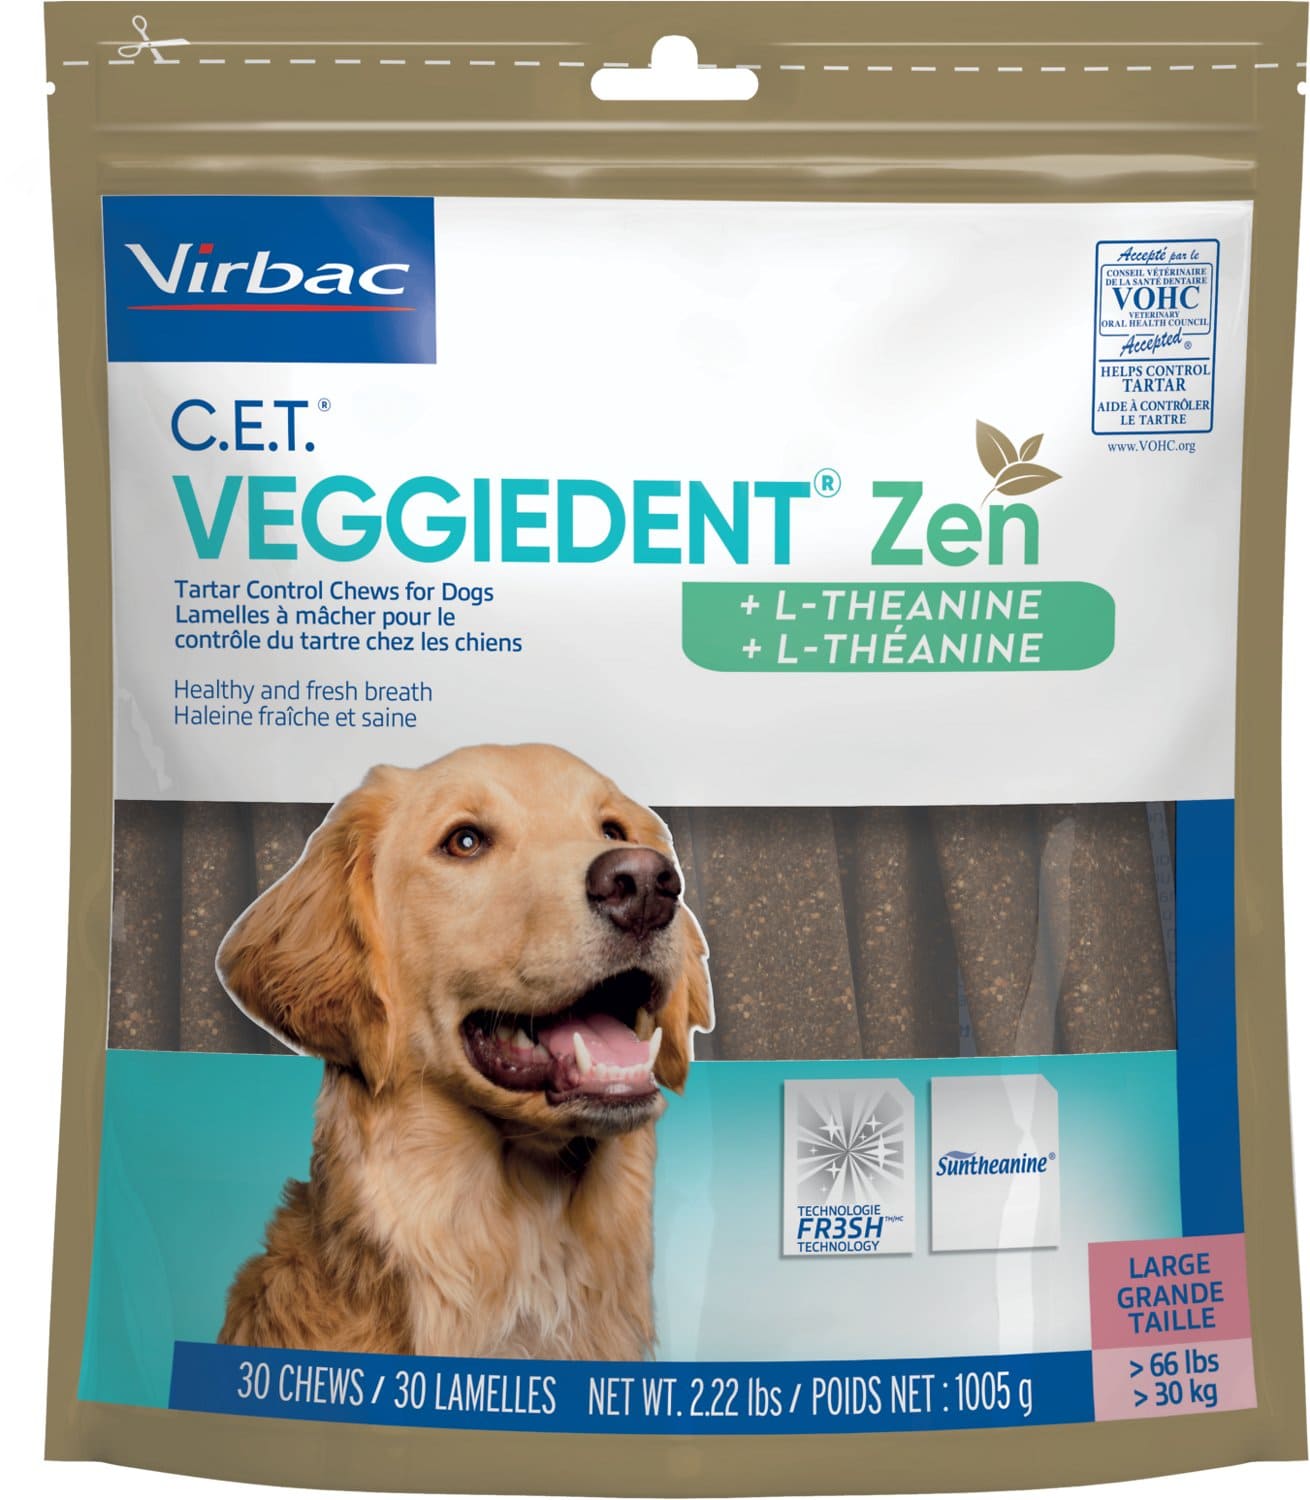 C.E.T. VeggieDent Zen + L-Theanine for large dogs over 66 lbs 30 chews 1